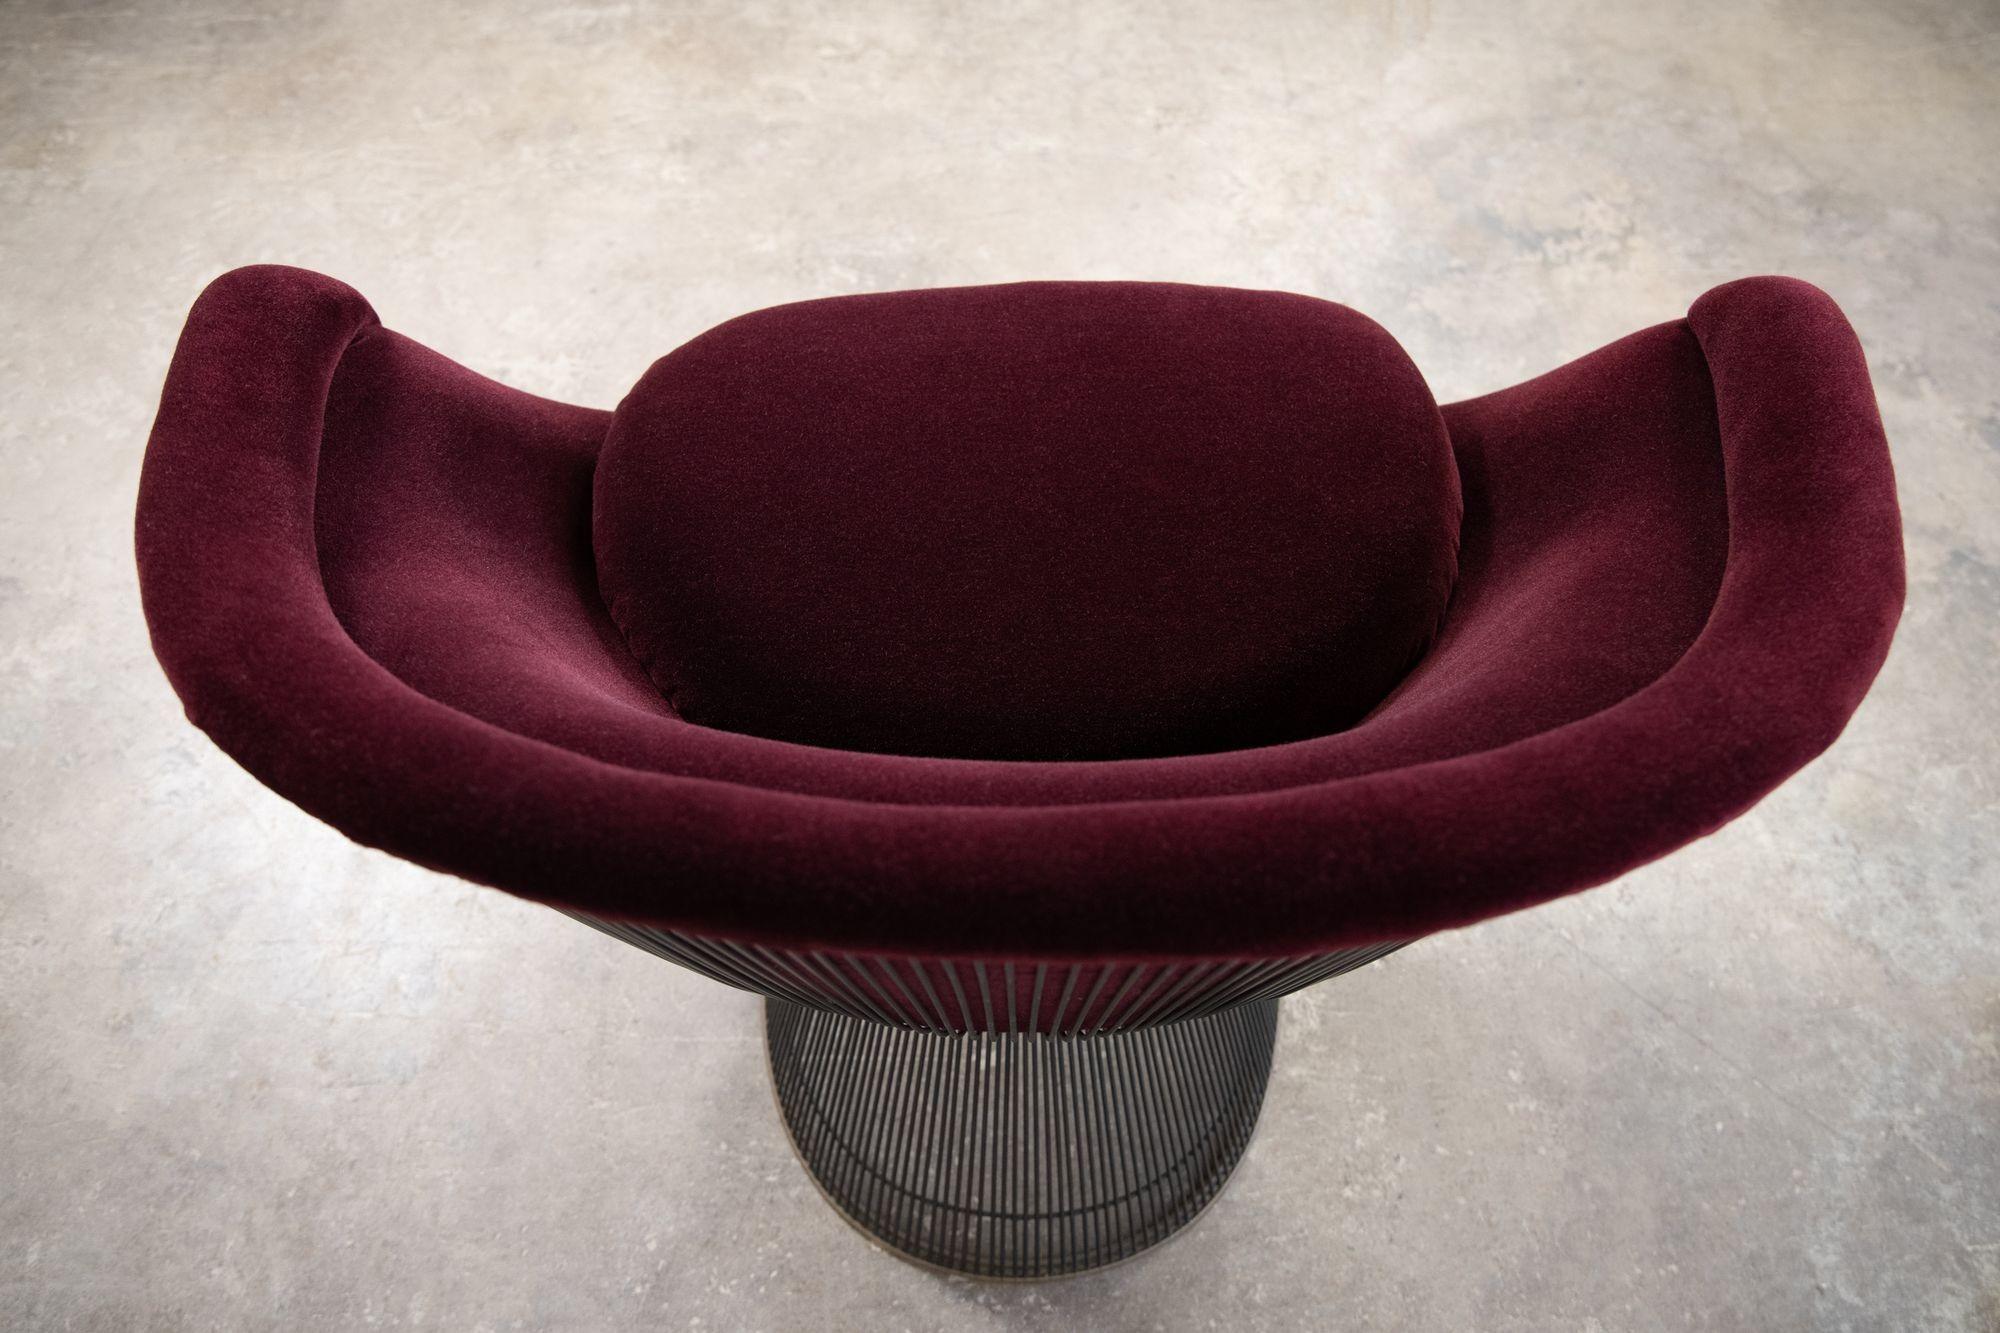 Bronze Early Lounge Chairs Designed by Warren Platner for Knoll International